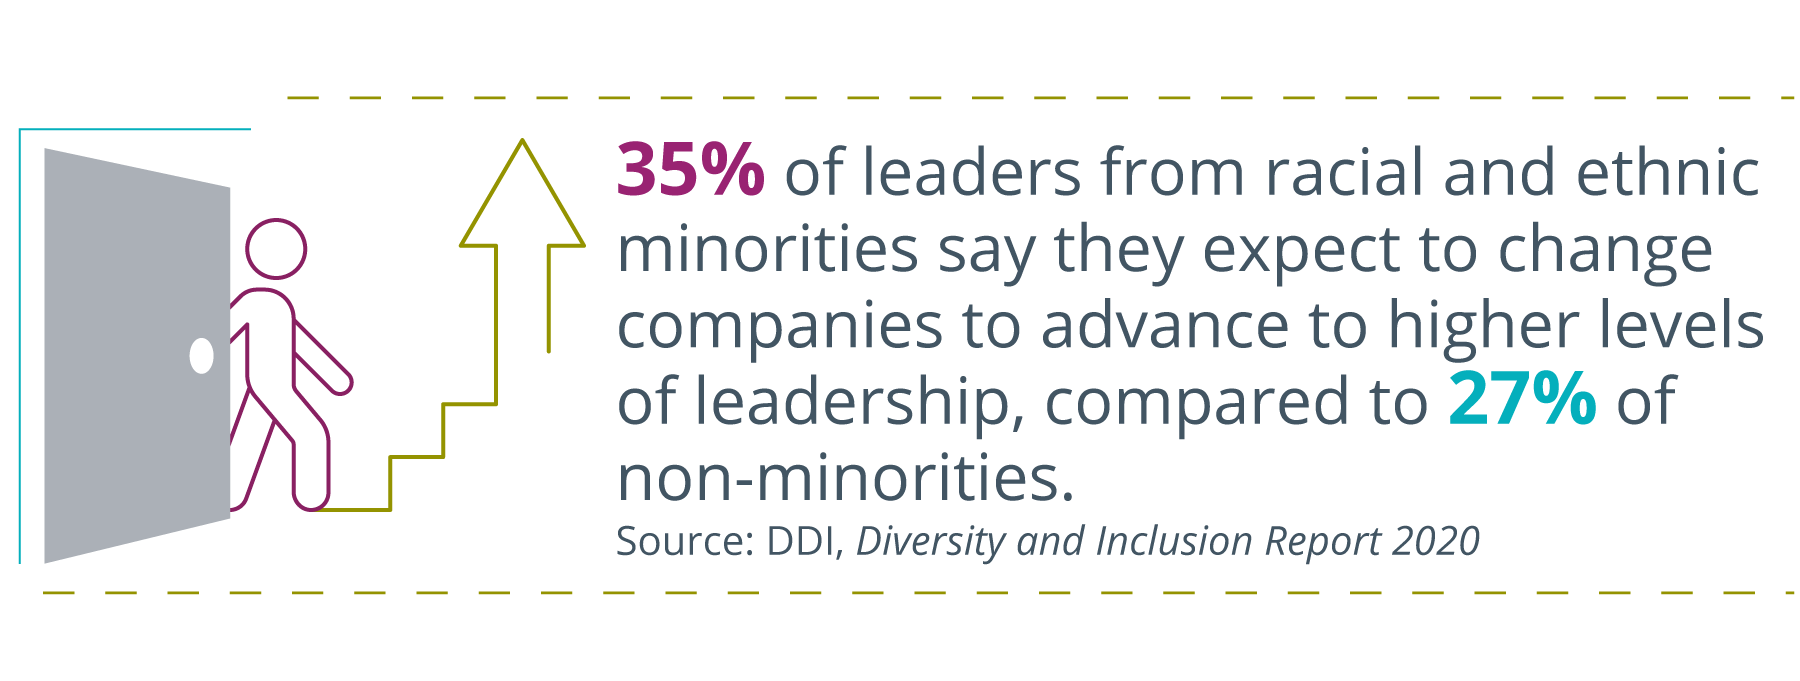 icon of a person opening a door and walking up steps to the left, and to the right, written: 35% of leaders from racial and ethnic minorities say they expect to change companies to advance to higher levels of leadership, compared to 27% of non-minorities. (Source: DDI, Diversity and Inclusion Report 2020